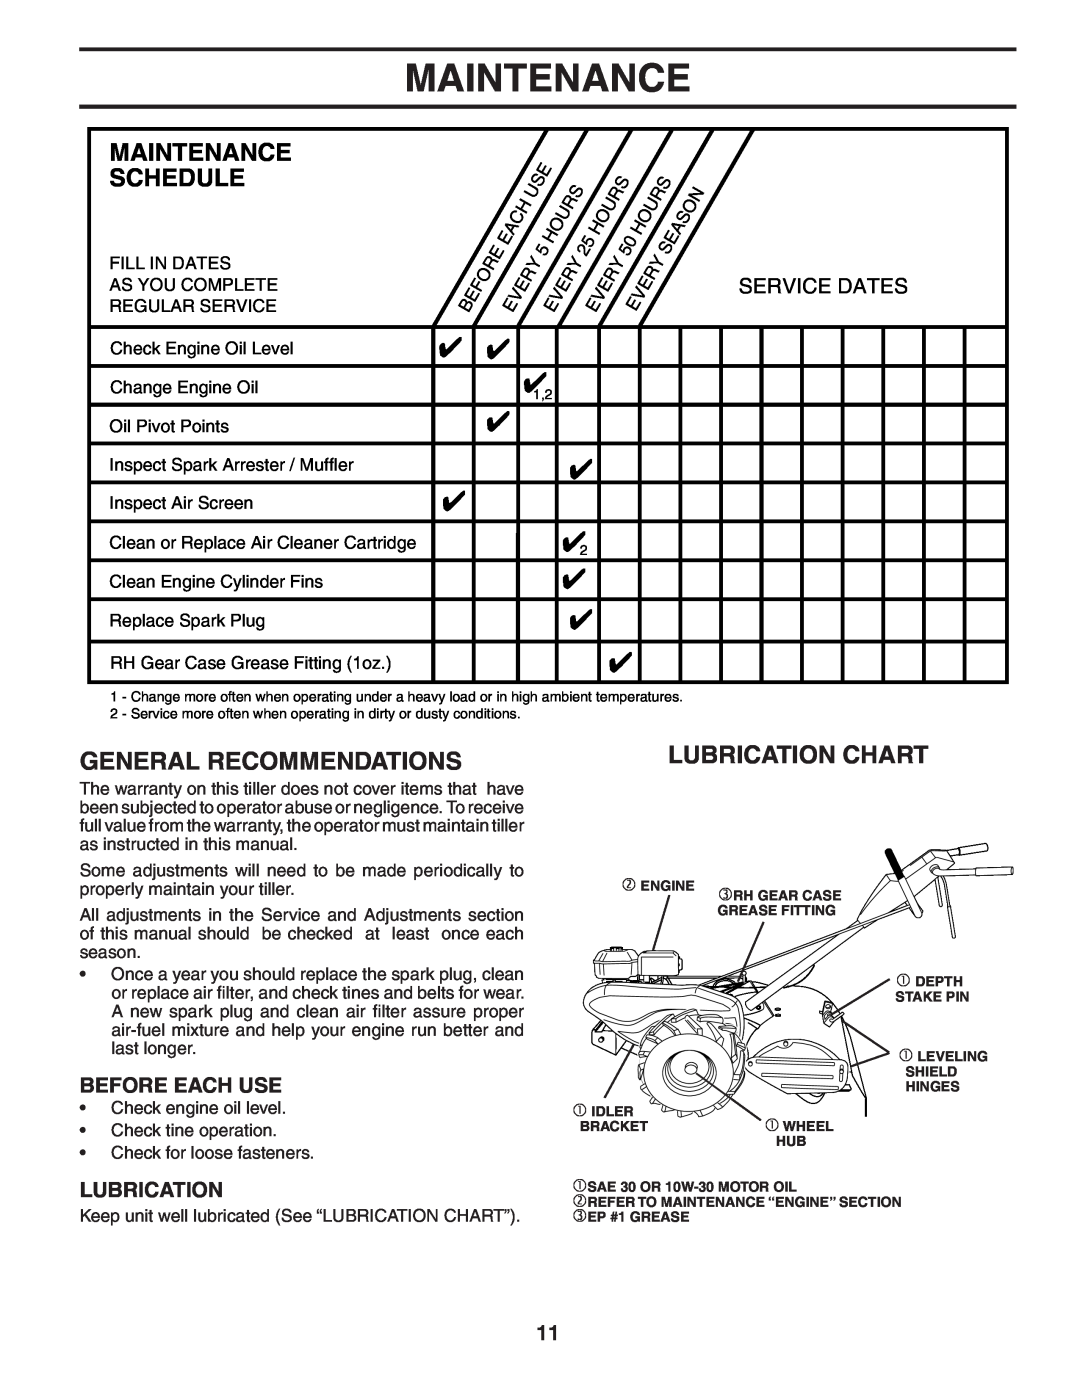 Poulan PRRT50 manual Maintenance, Schedule, General Recommendations, Lubrication Chart, Before Each Use, Service Dates 